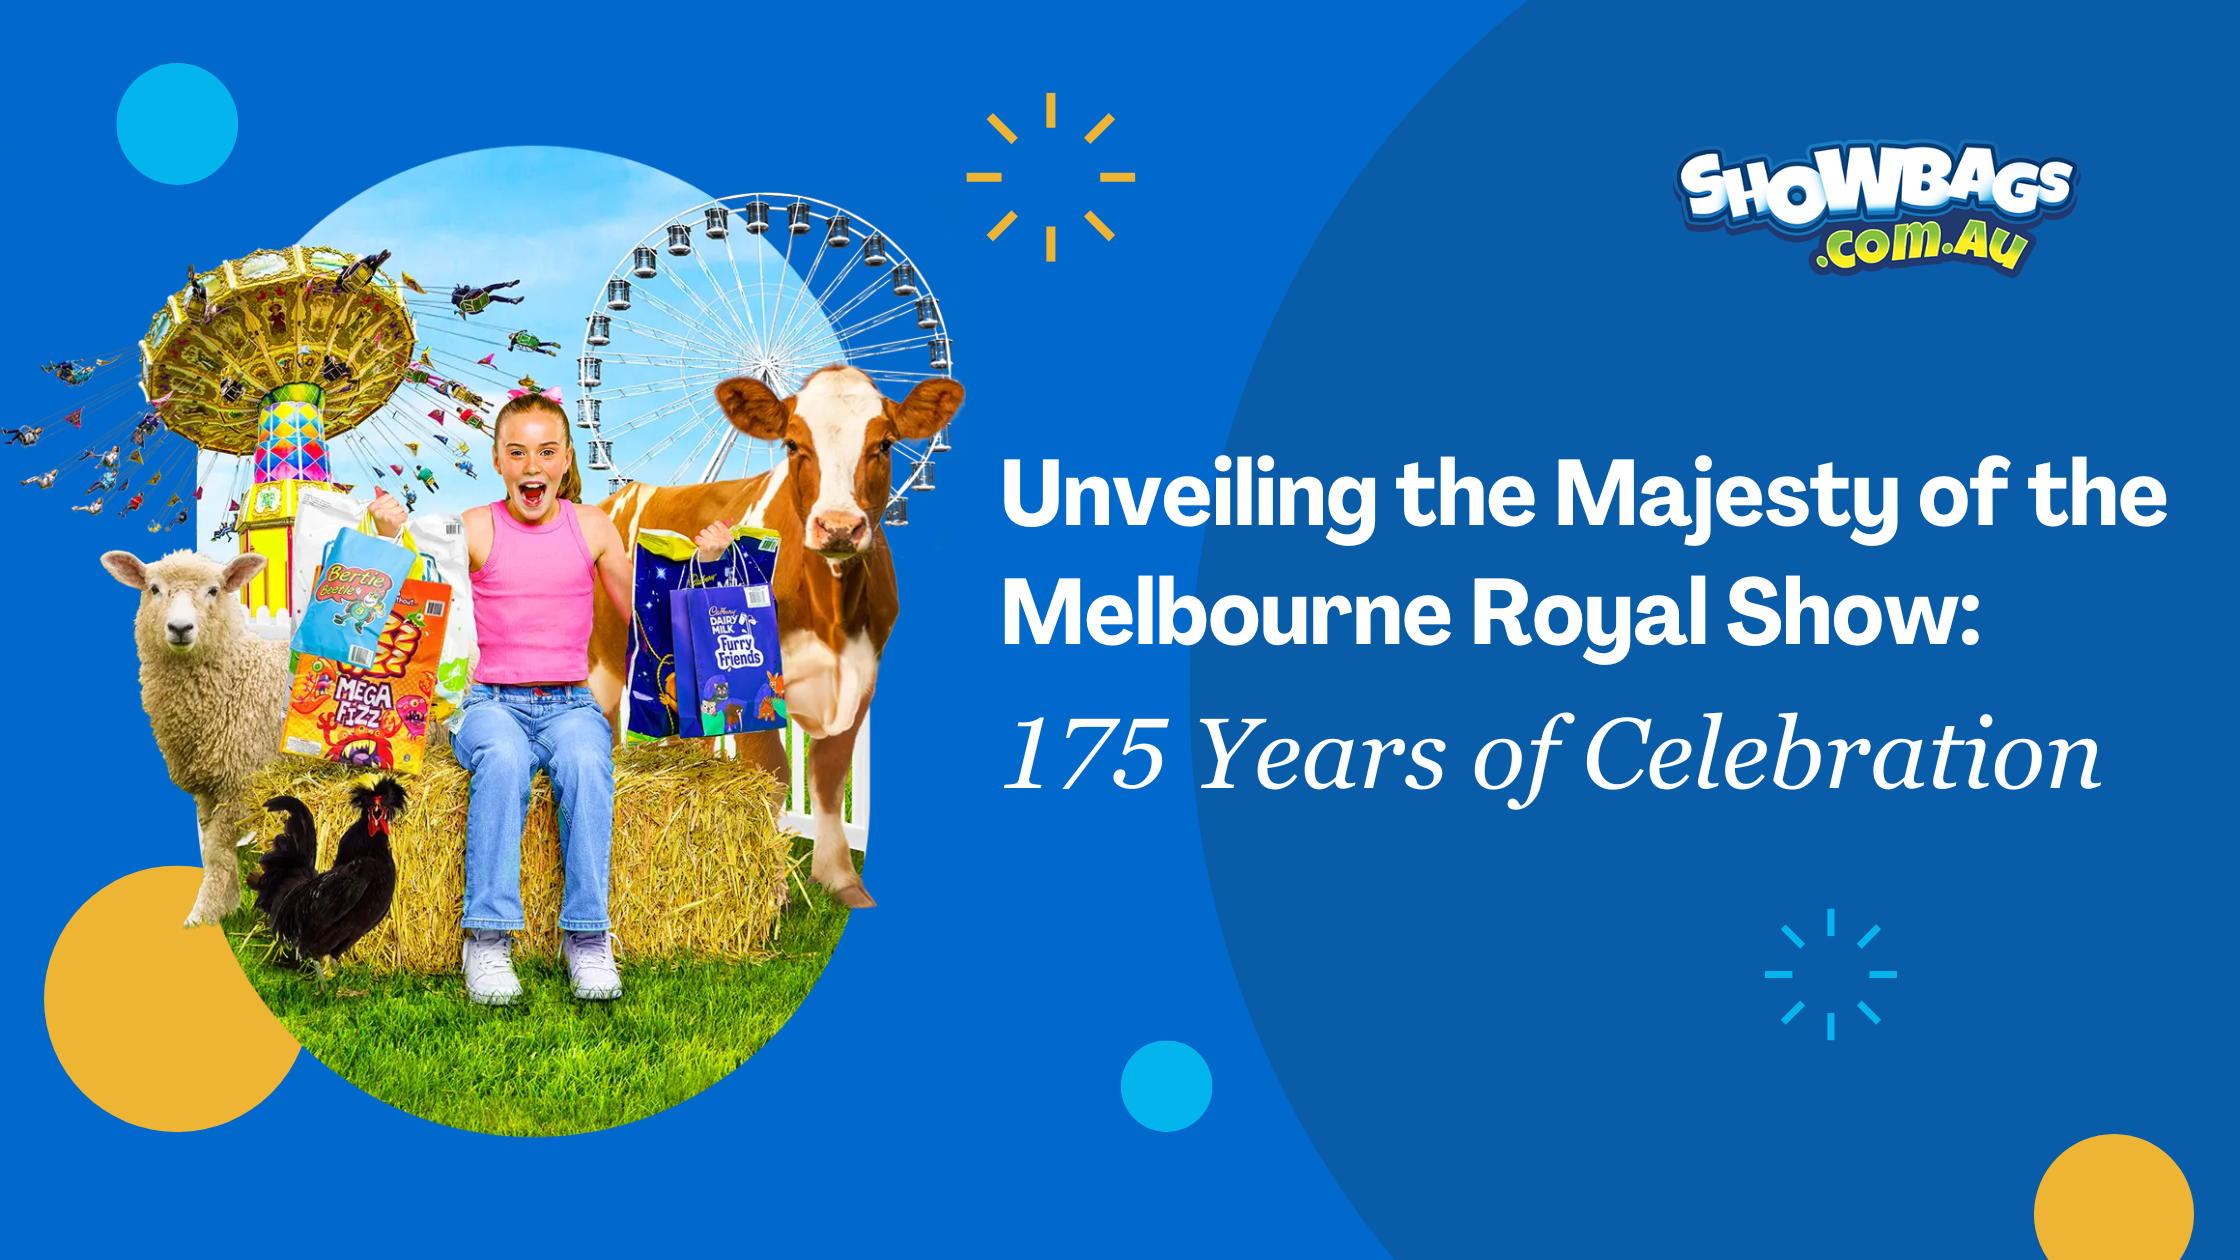 Unveiling the Majesty of the Melbourne Royal Show Showbags